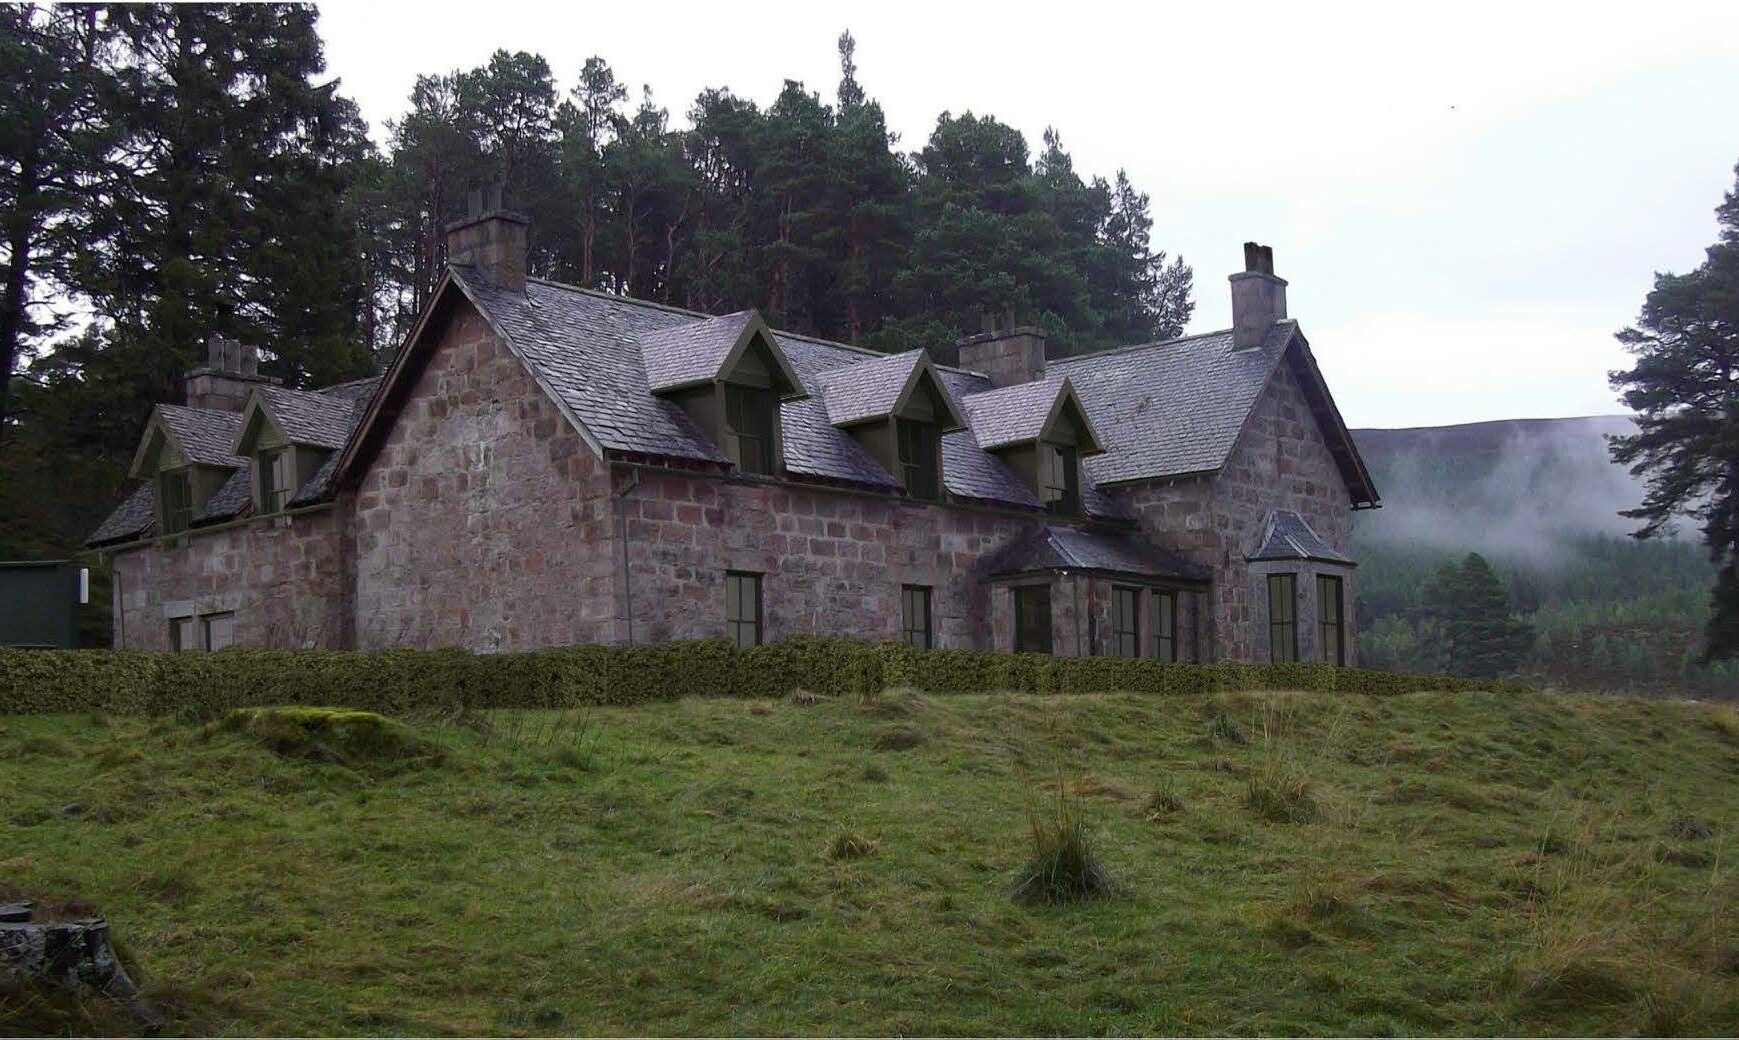 The 18th century hunting lodge